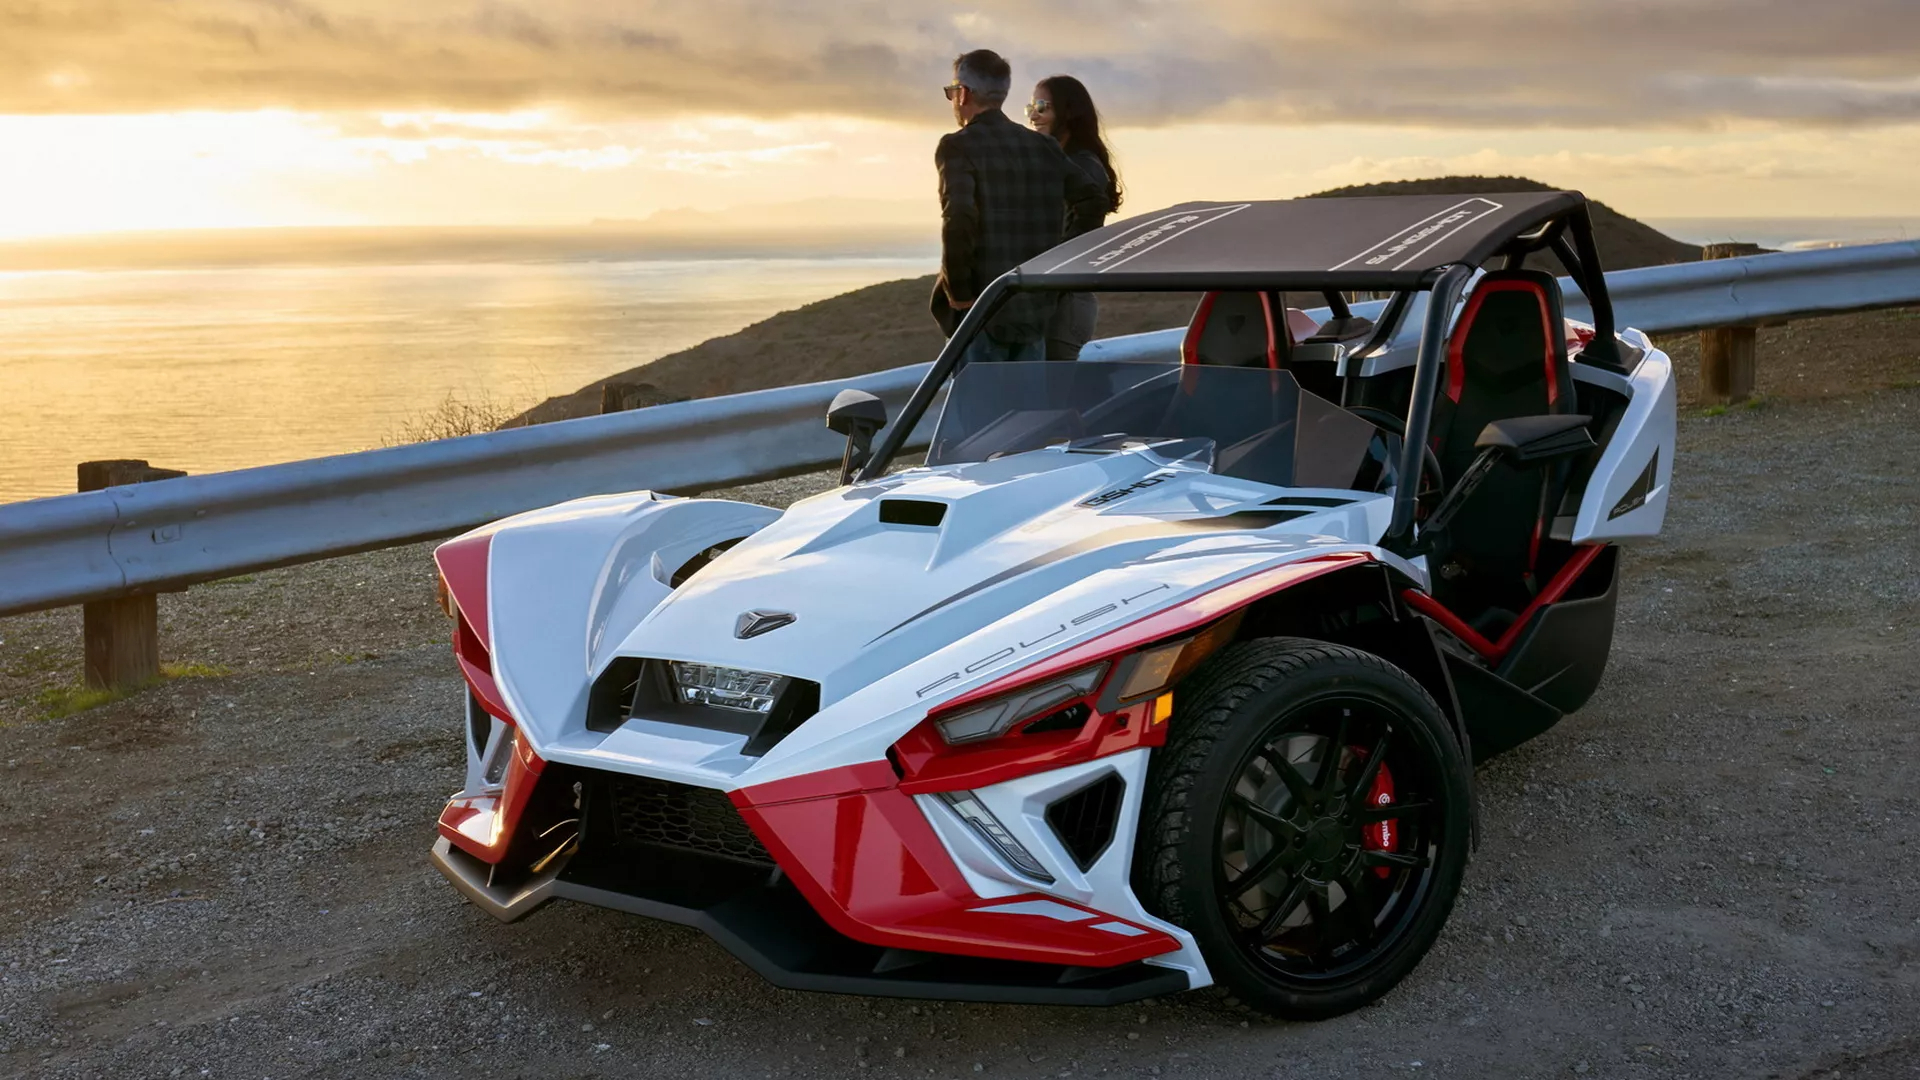 2023 Polaris Slingshot Roush Edition an exclusive graphics package